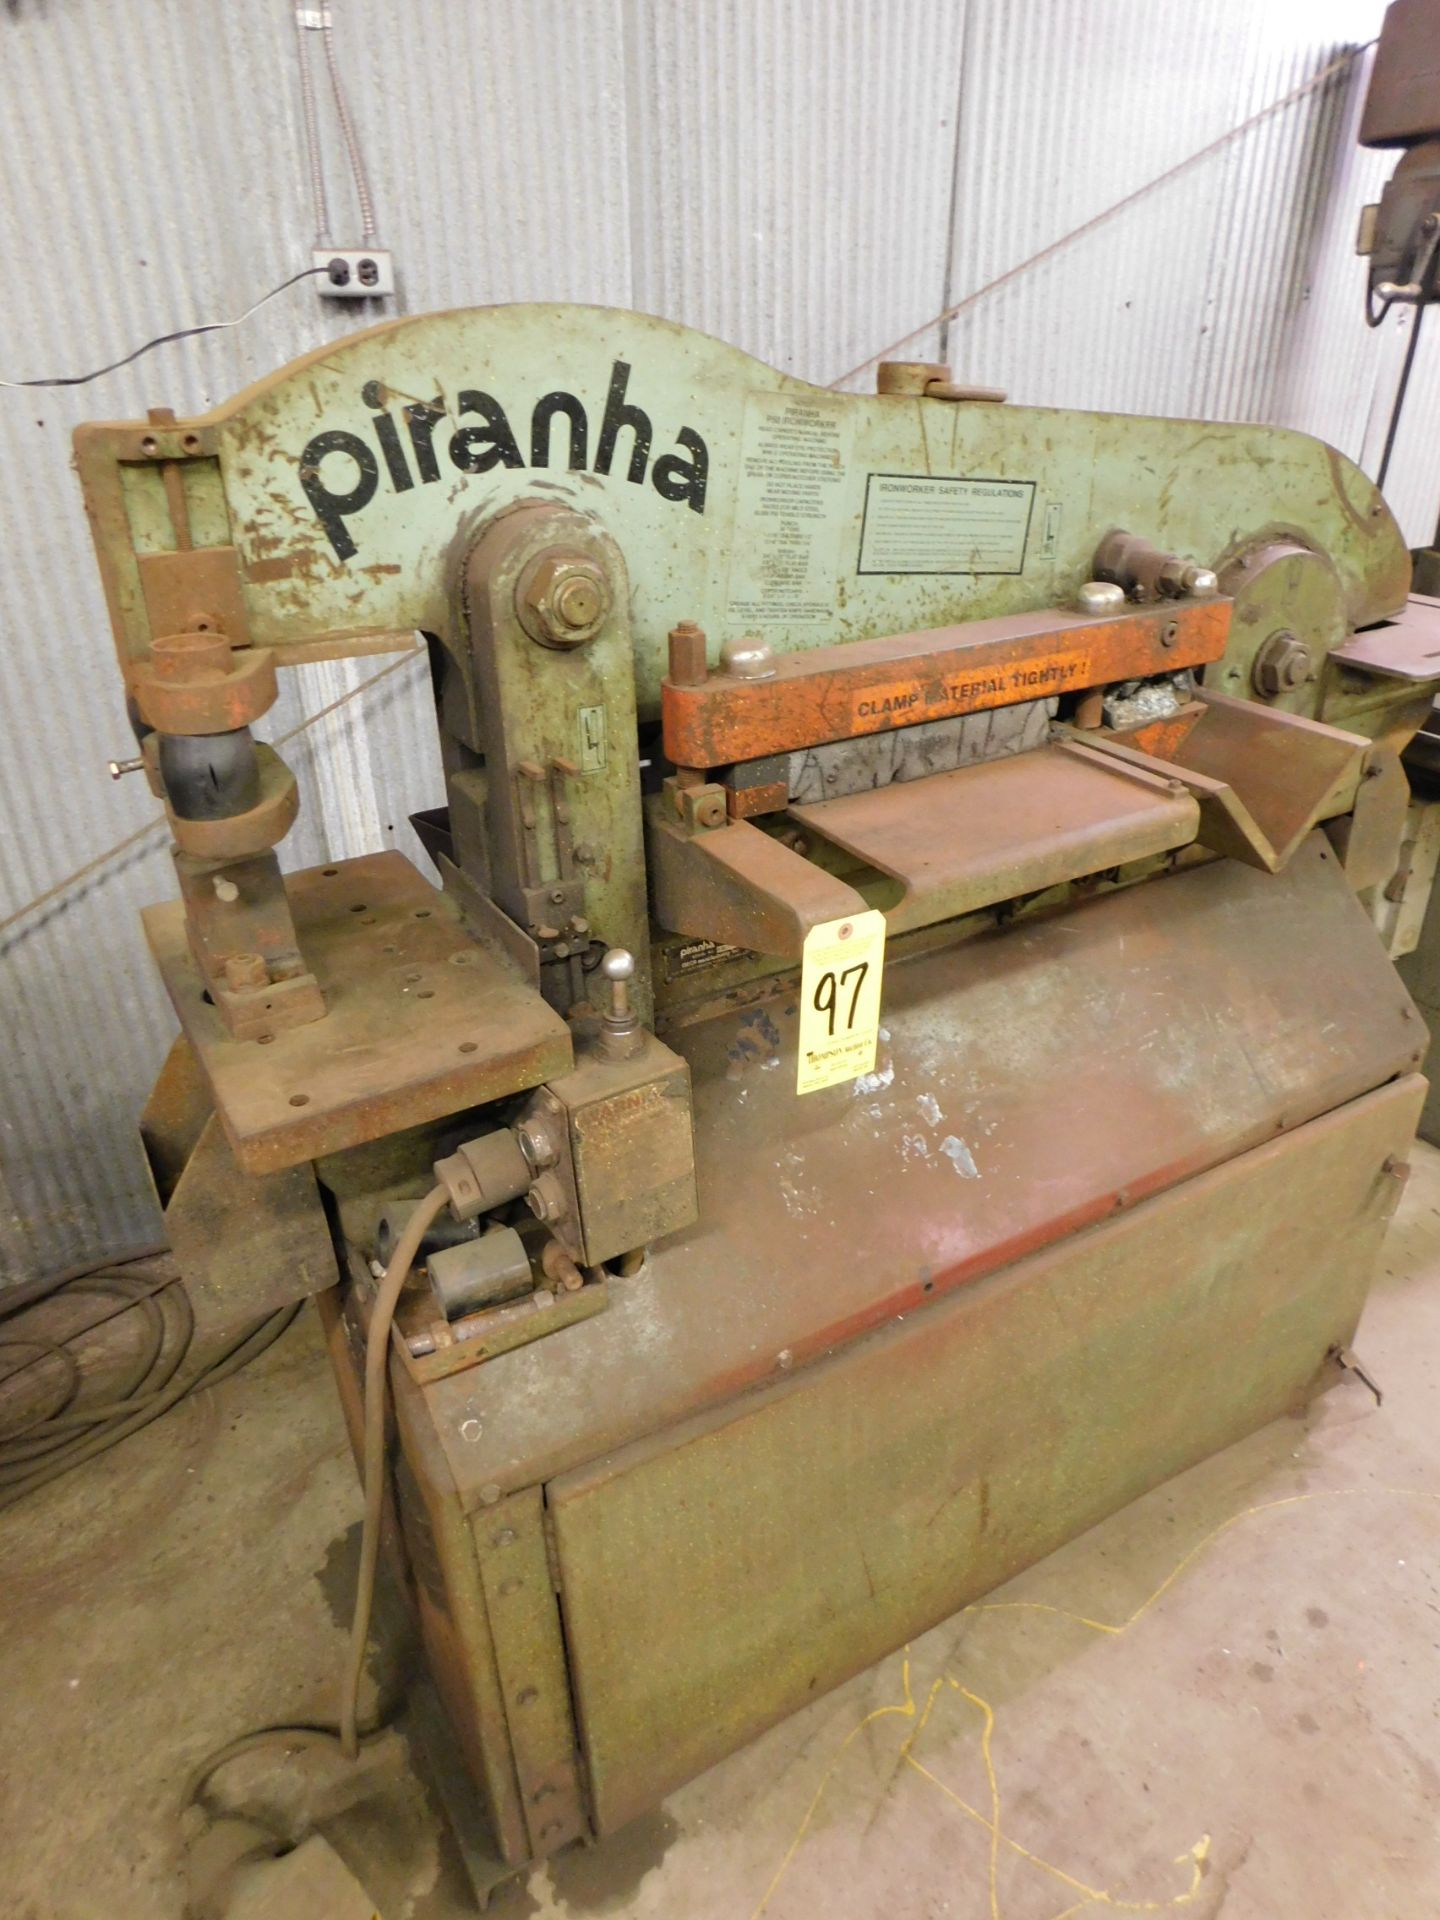 Piranha Model P50 Hydraulic Ironworker, s/n P50-4308, 50 Ton Capacity, 5 In. X 5 In. X 3/8 In. - Image 4 of 8